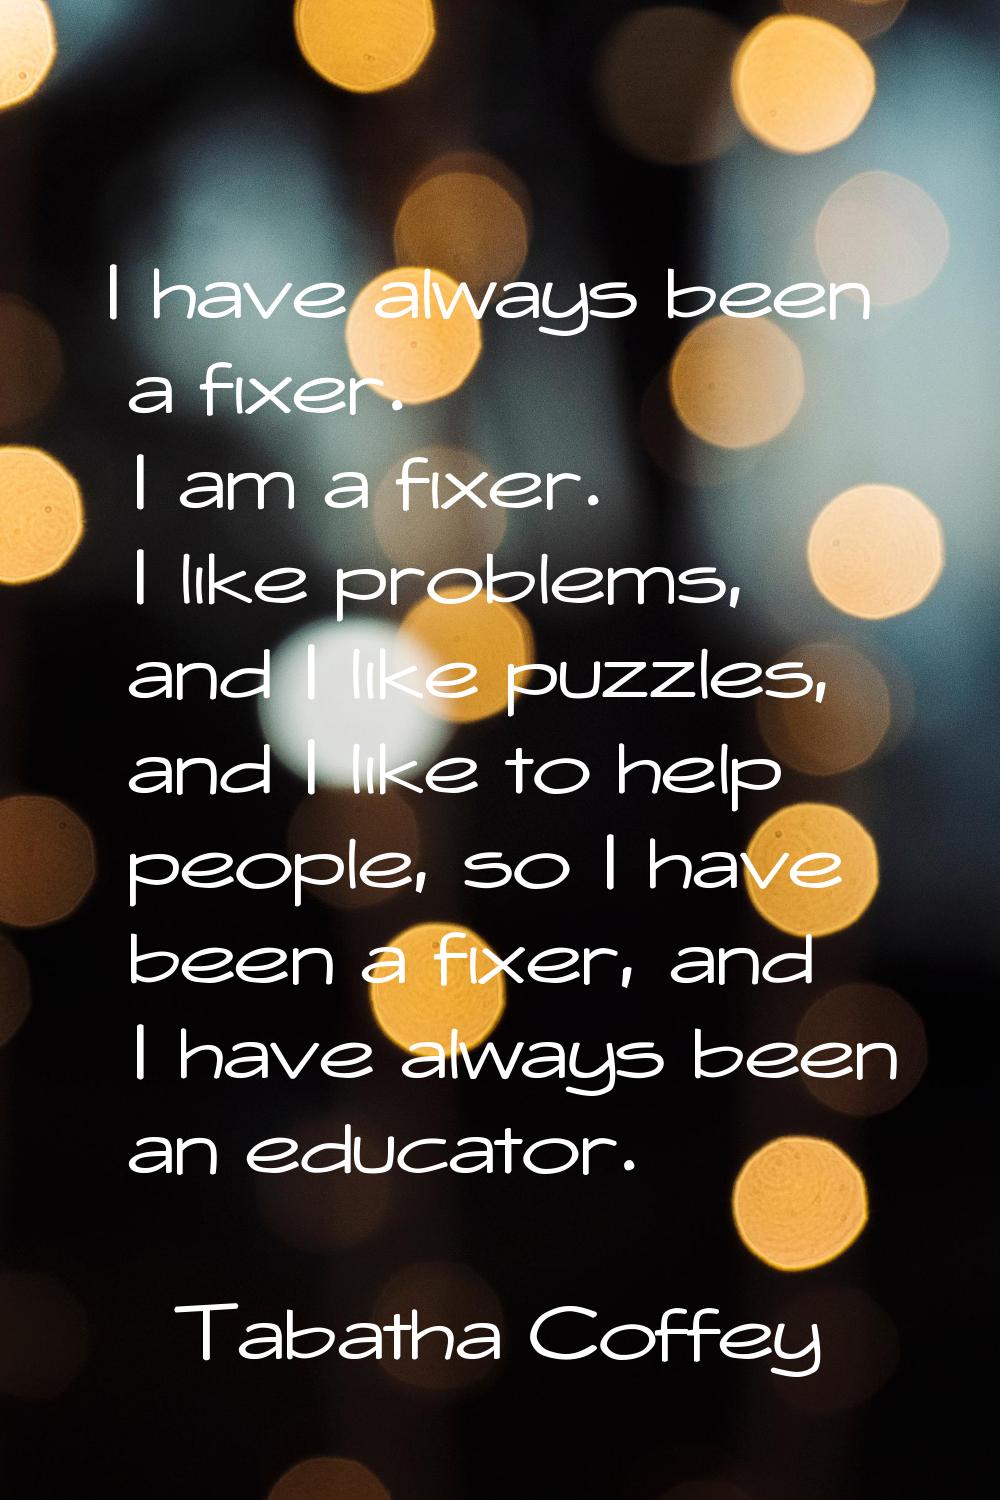 I have always been a fixer. I am a fixer. I like problems, and I like puzzles, and I like to help p